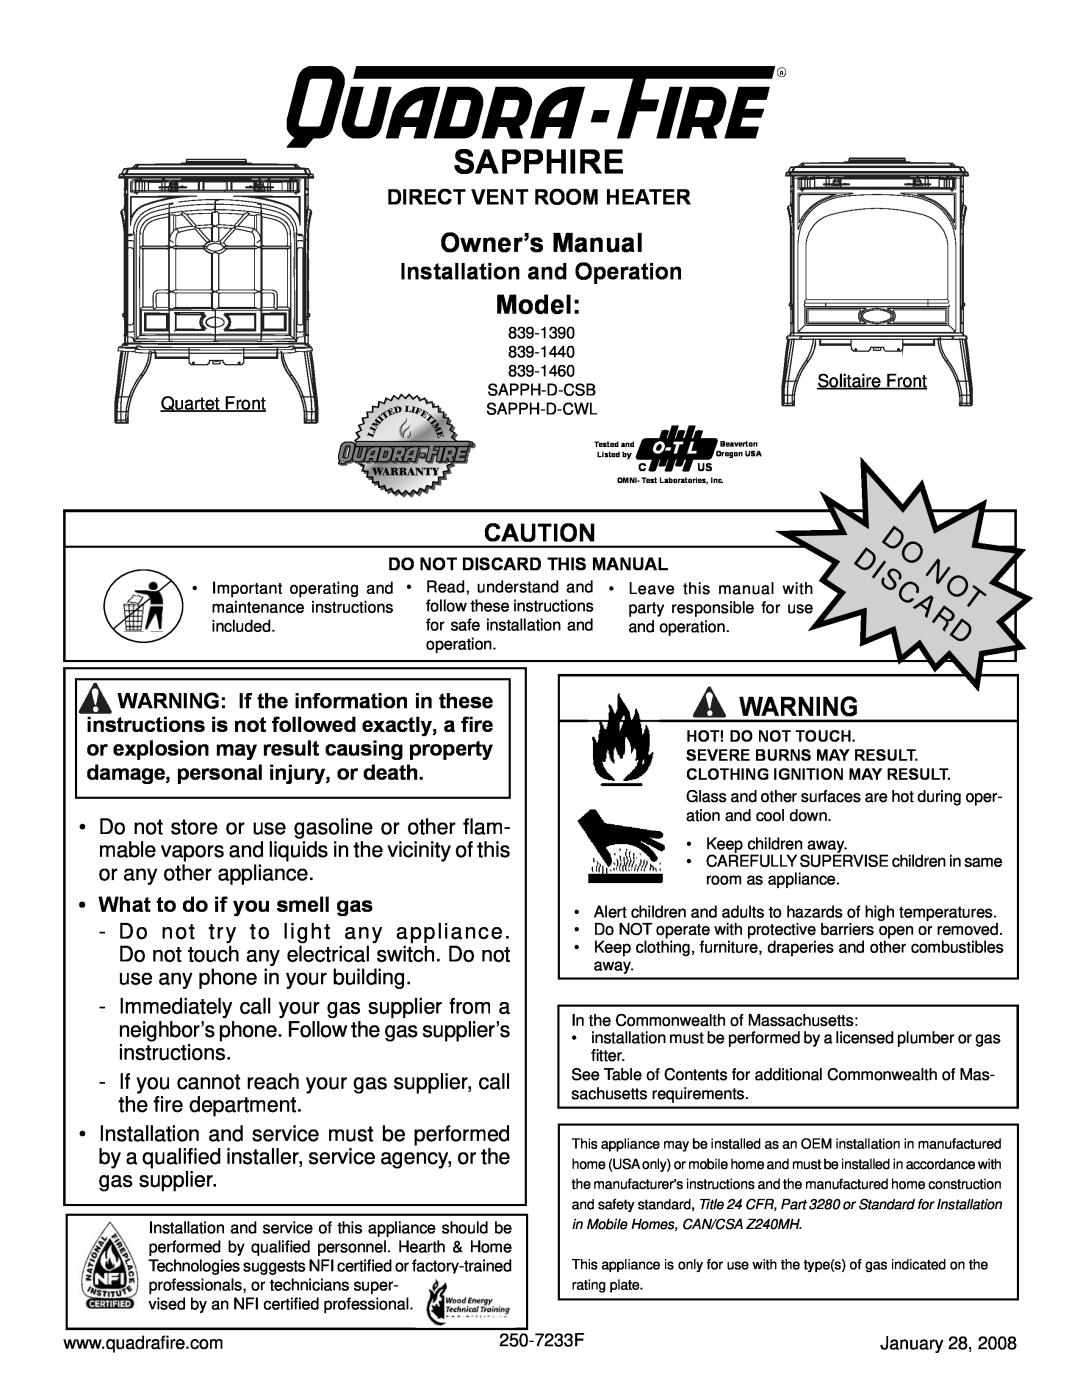 Quadra-Fire SAPPH-D-CWL owner manual Installation and Operation, Direct Vent Room Heater, What to do if you smell gas 